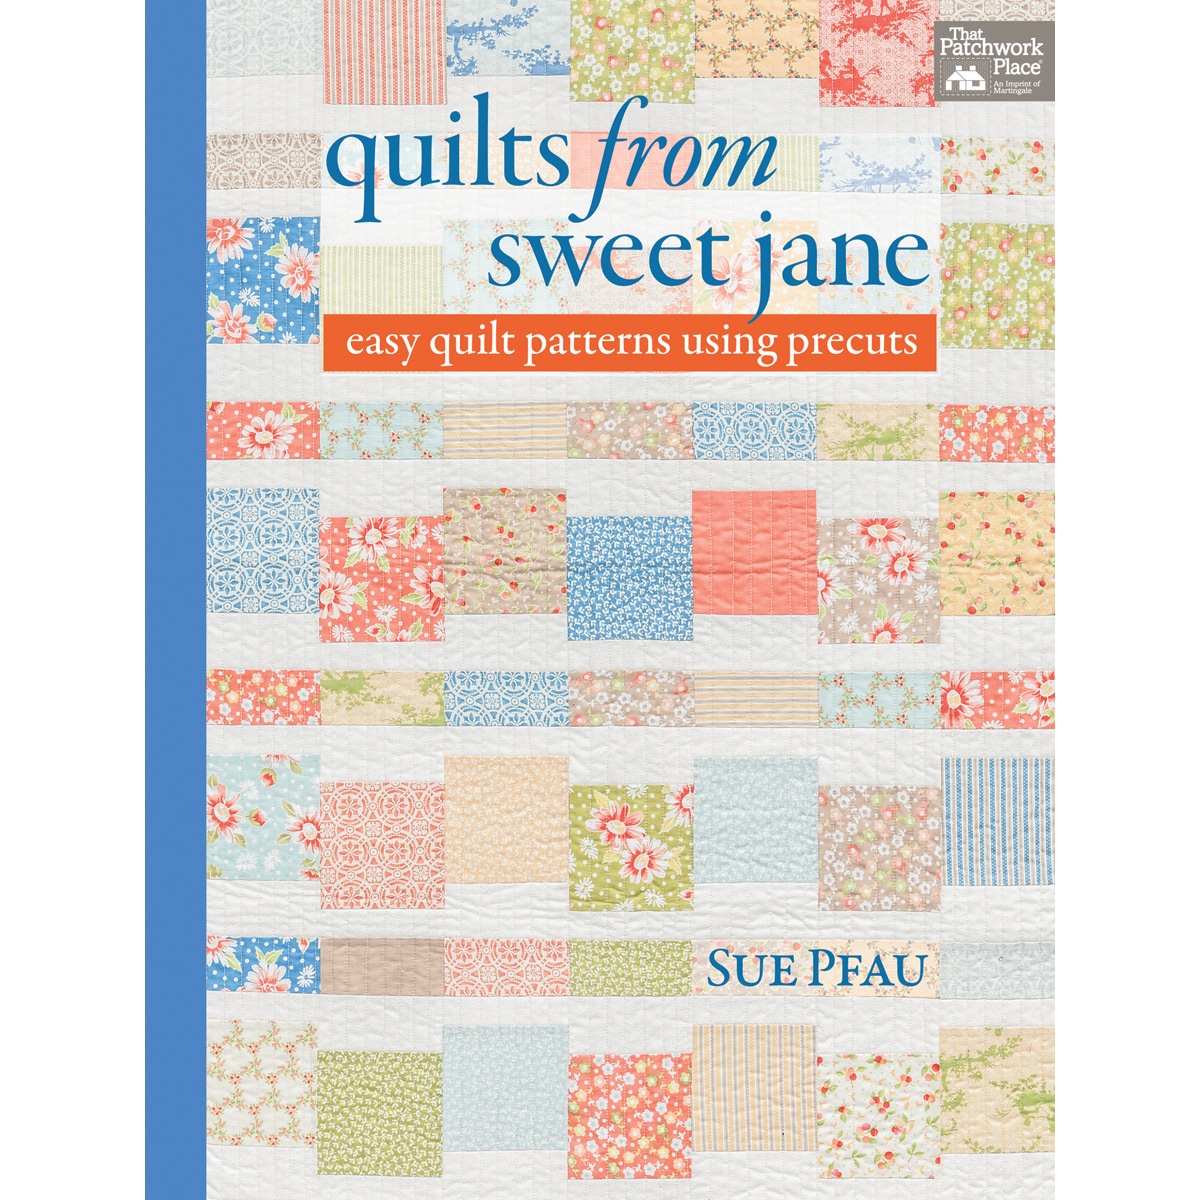 That Patchwork Place quilts From Sweet Jane